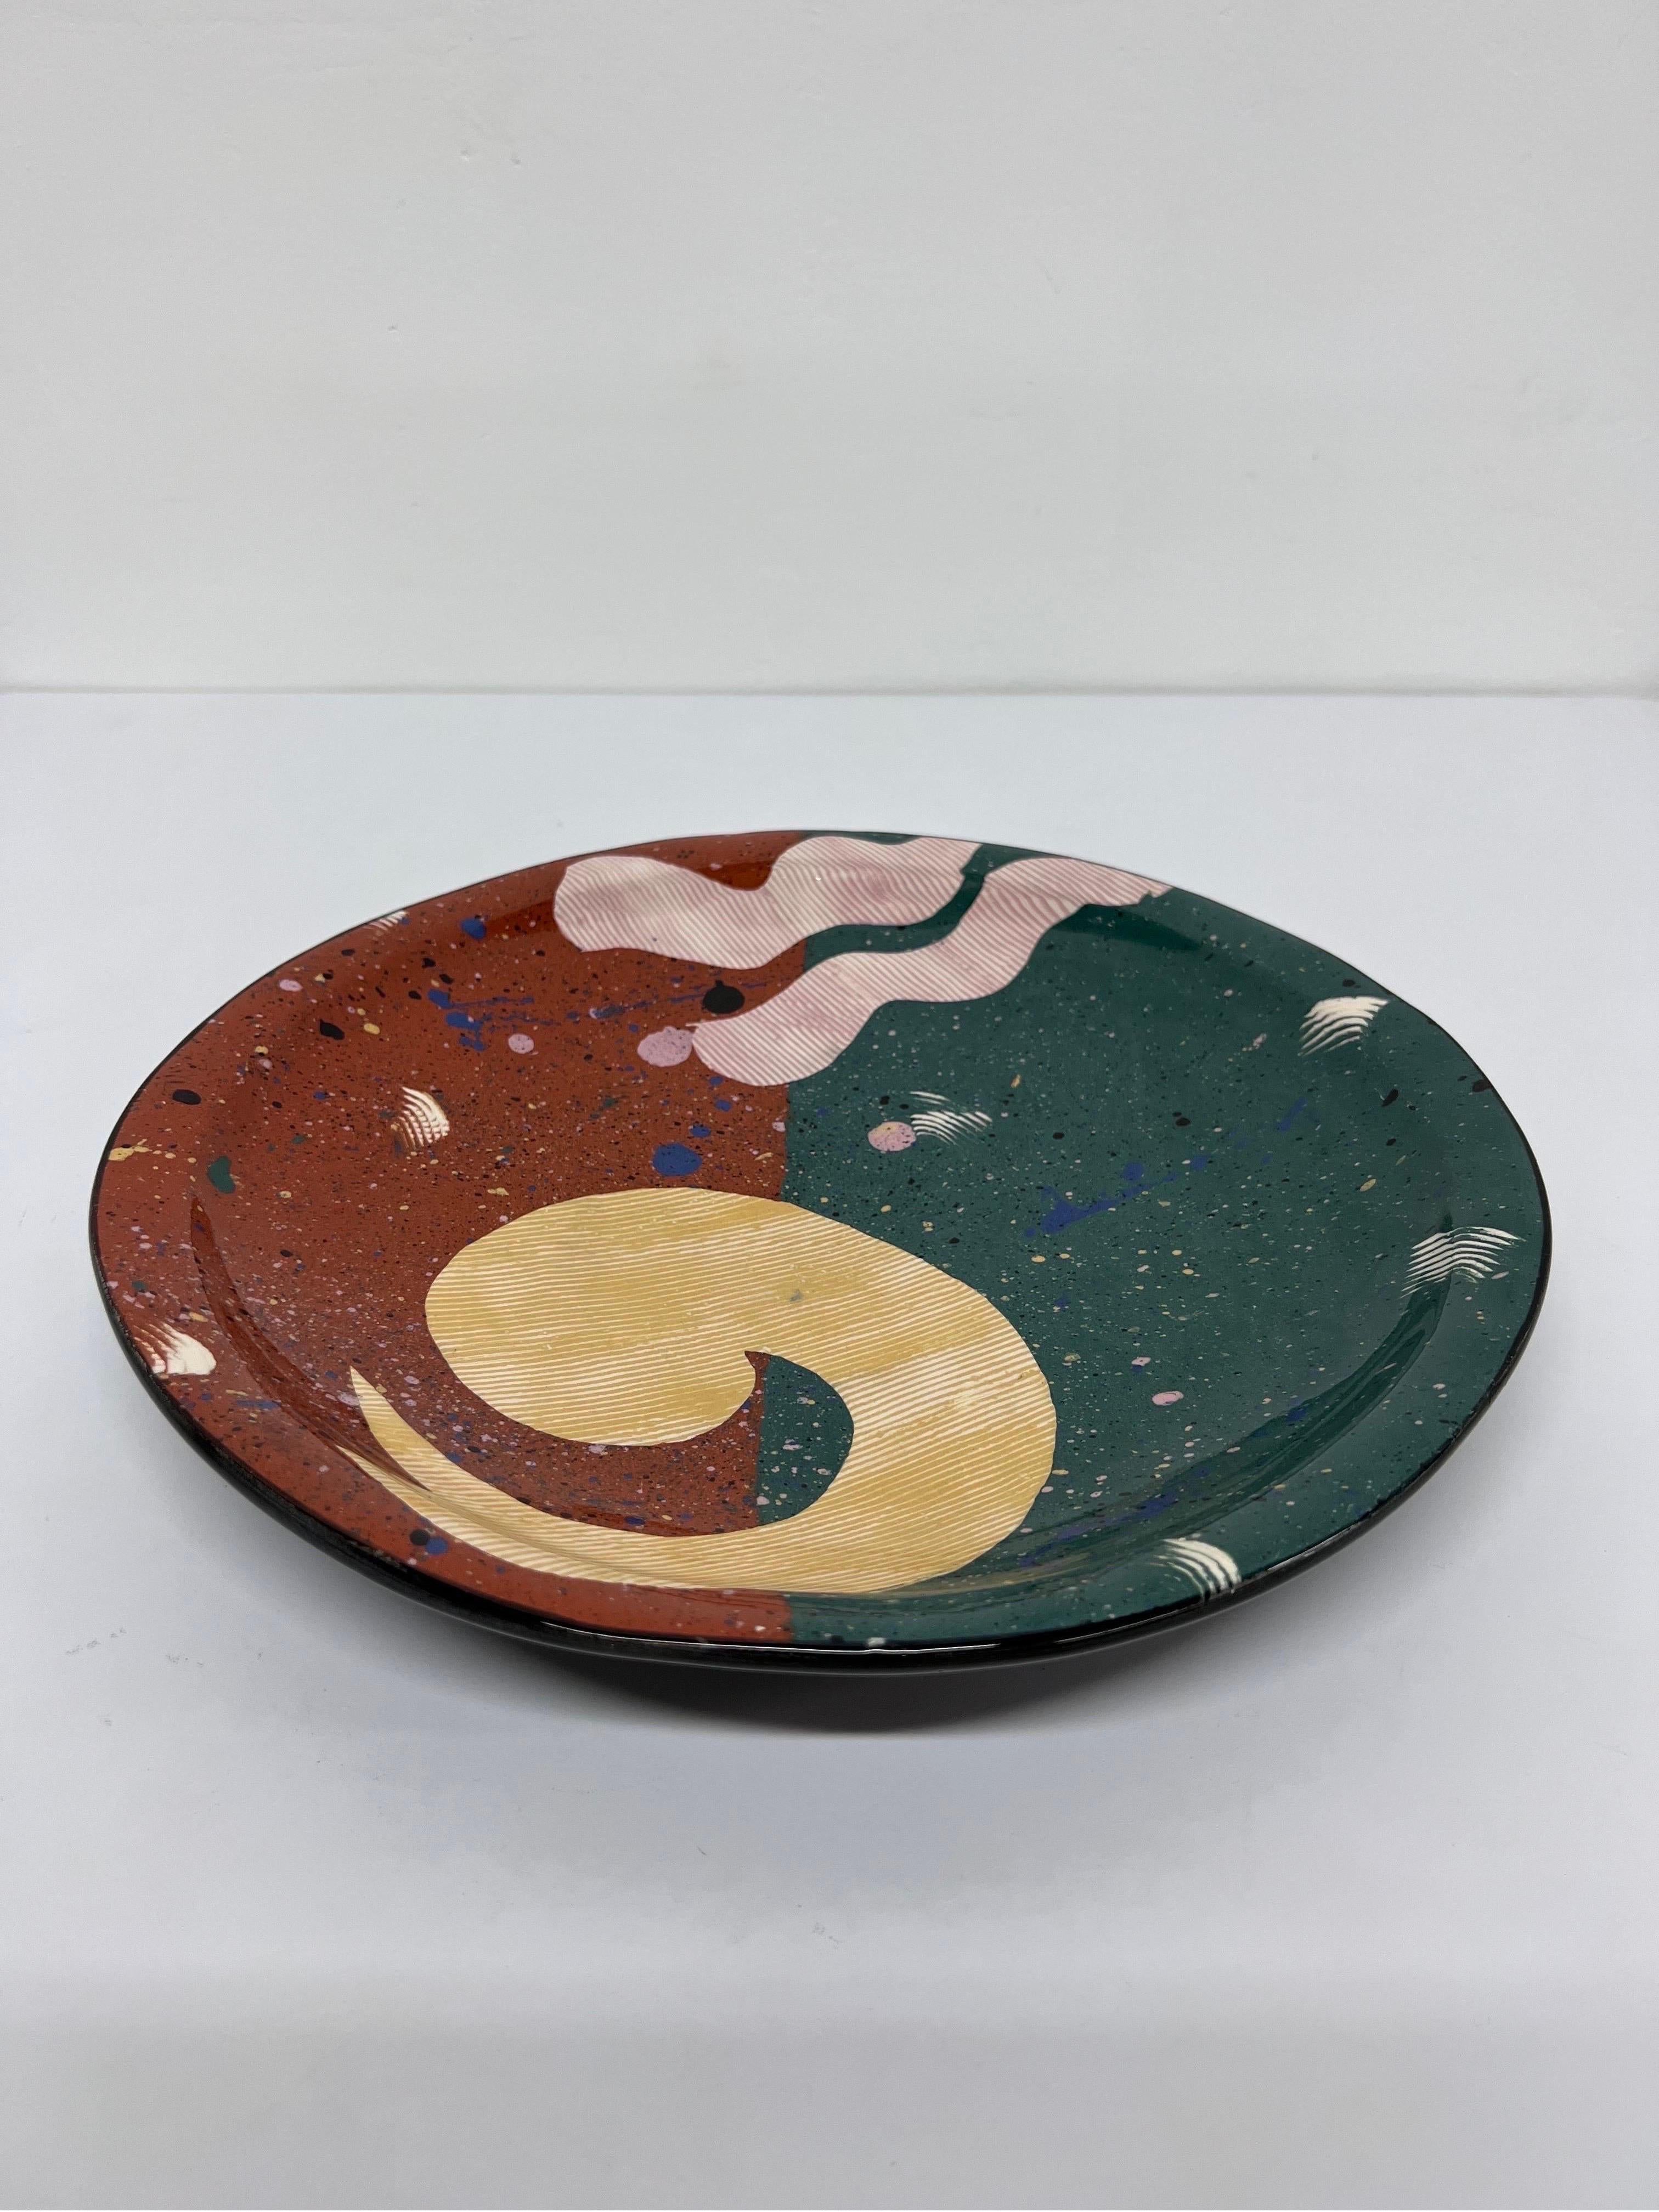 Cera-Mix postmodern art dinner plate or charger by Claude Reese.